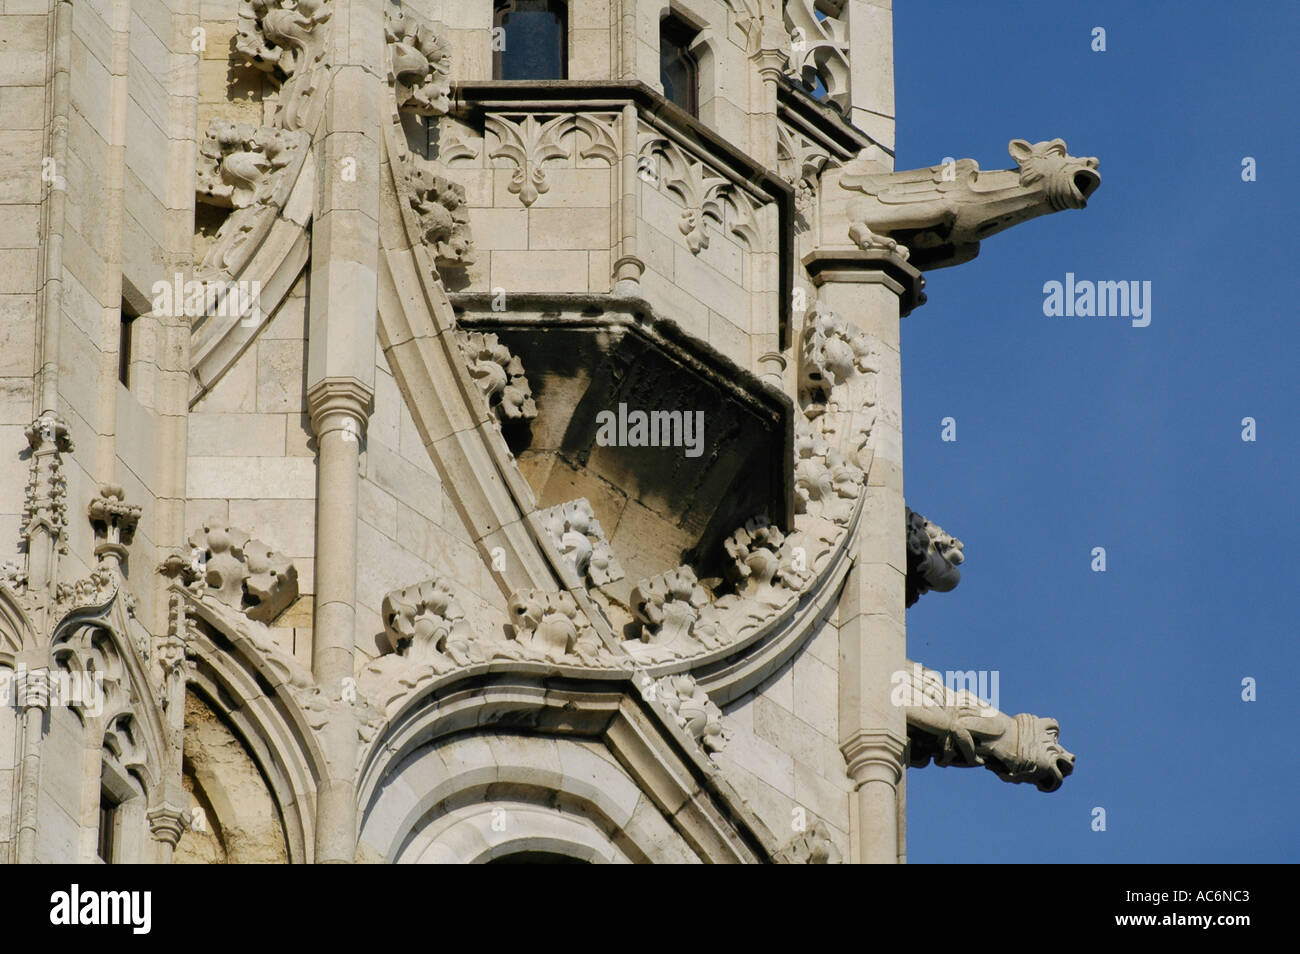 Gargoyles decorating the spire of the Roman Catholic Matthias or Matyas church built in the florid late Gothic style in Buda castle district Budapest Stock Photo